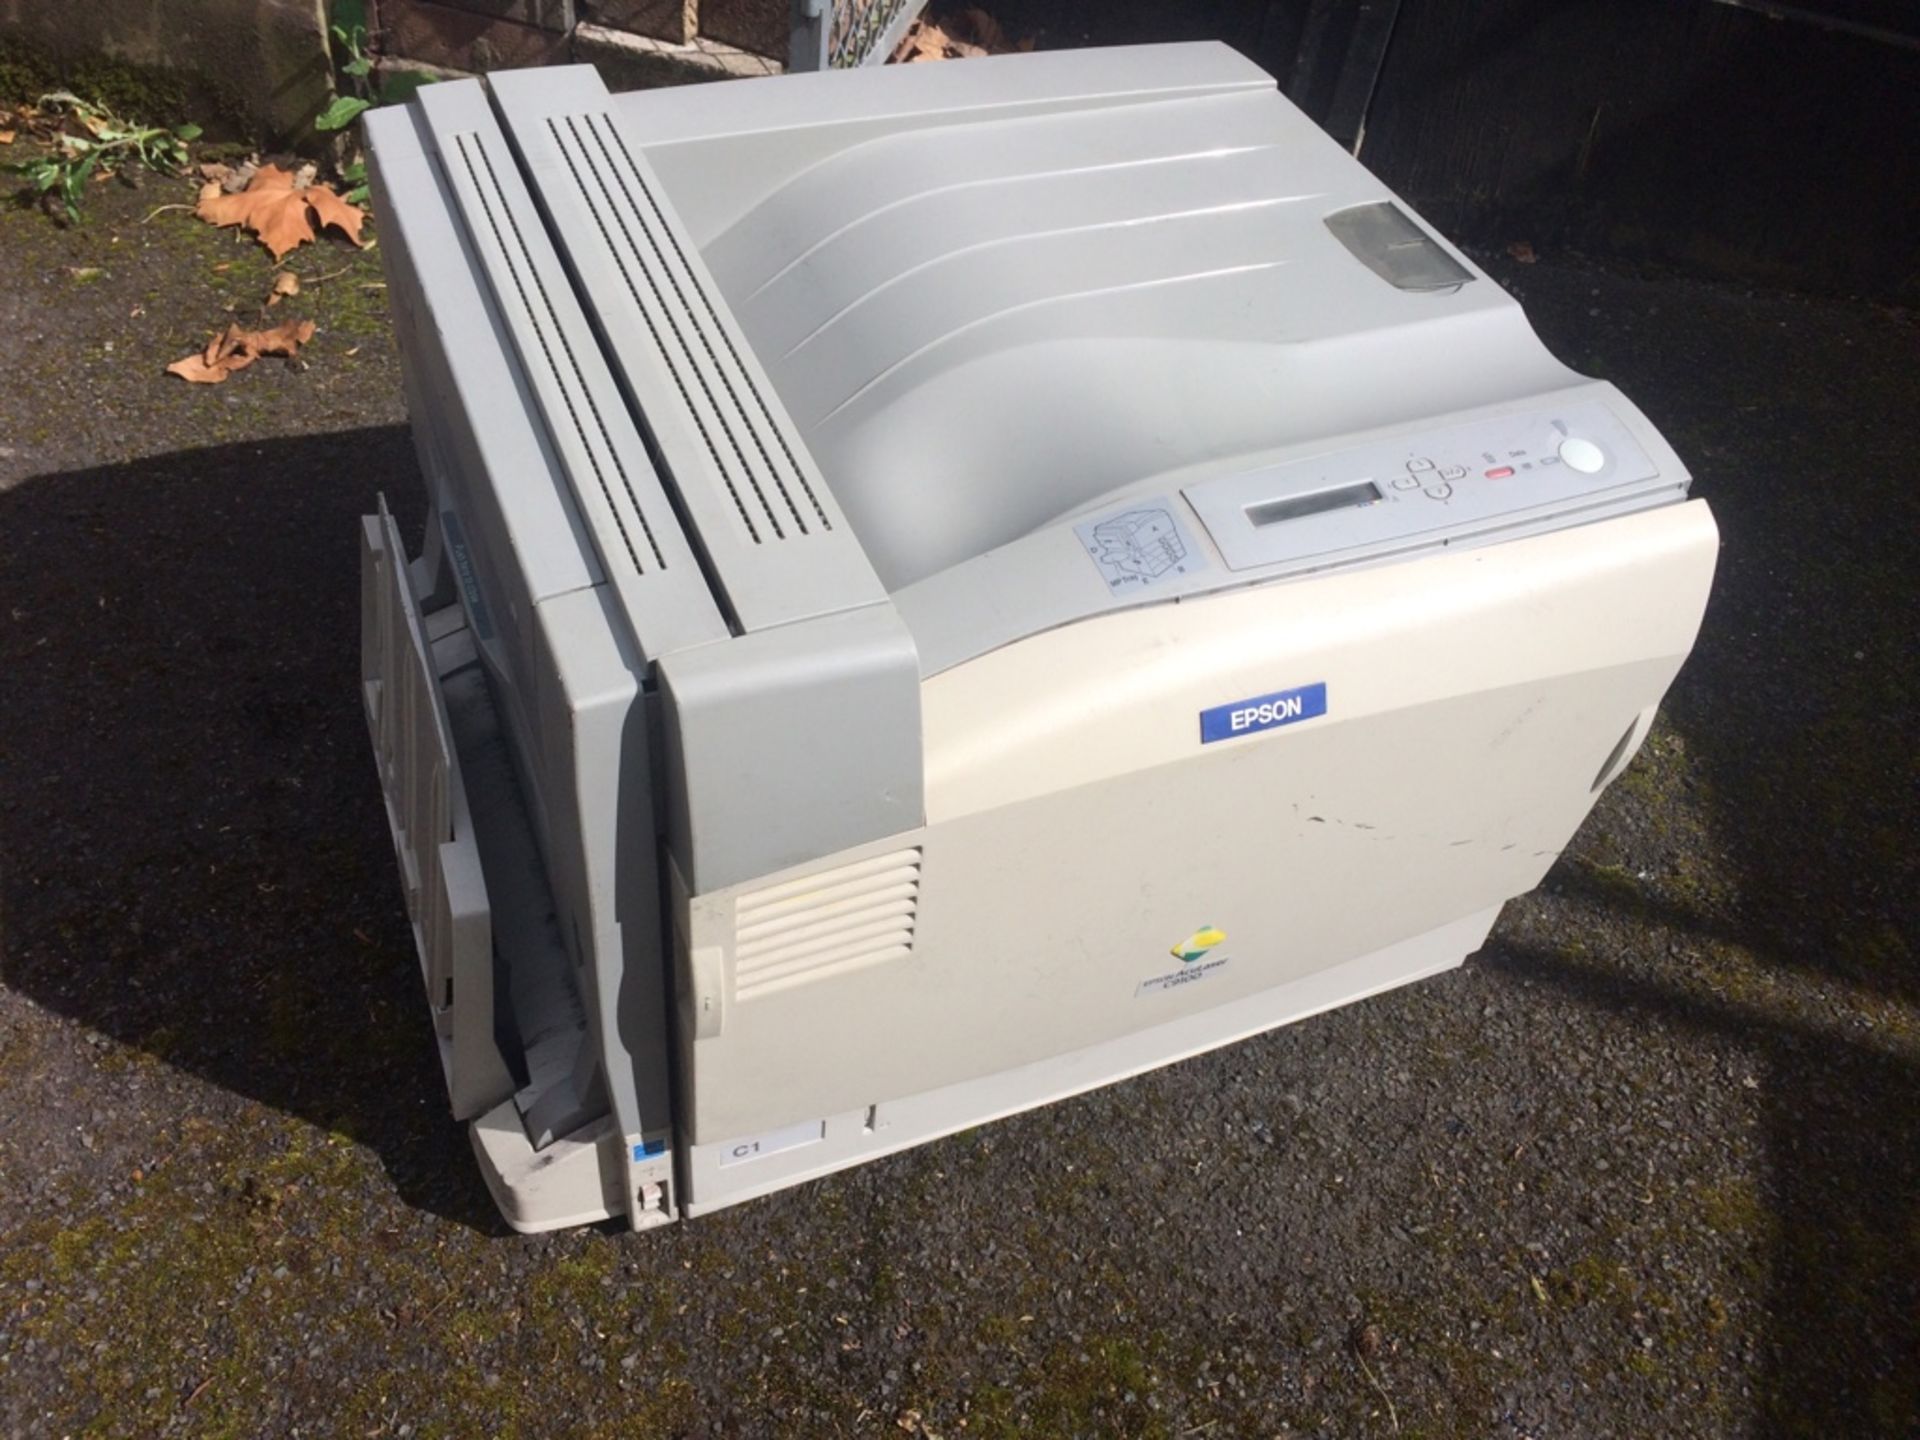 A3 COLOUR LASER PRINTER PLEASE READ LOT 0 AS THE IMPORTANT INFORMATION DIFFERS FROM OUR USUAL